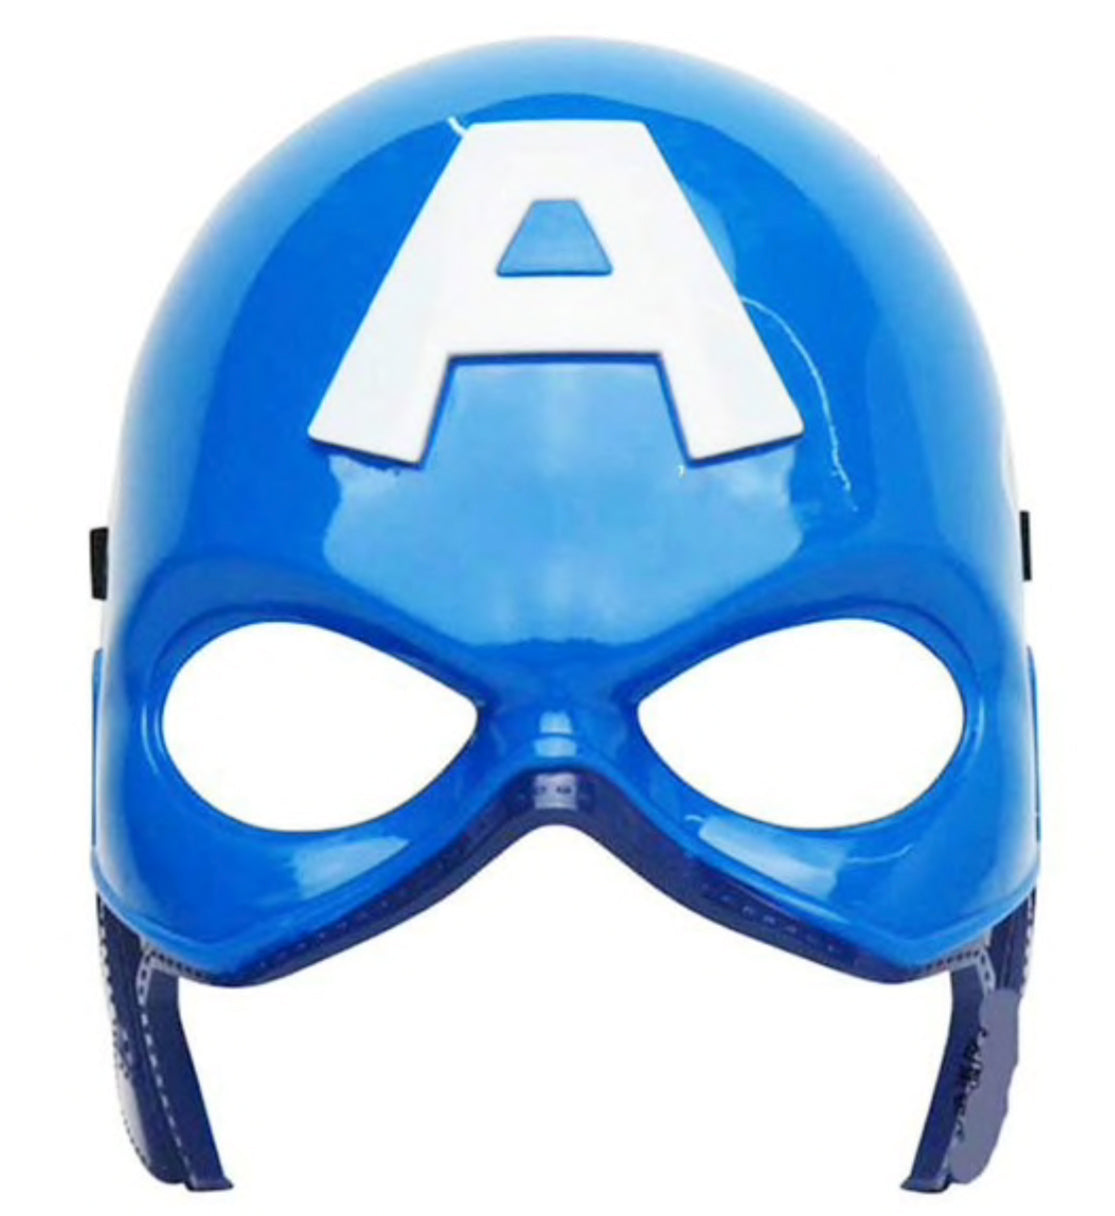 Captain America Character Mask